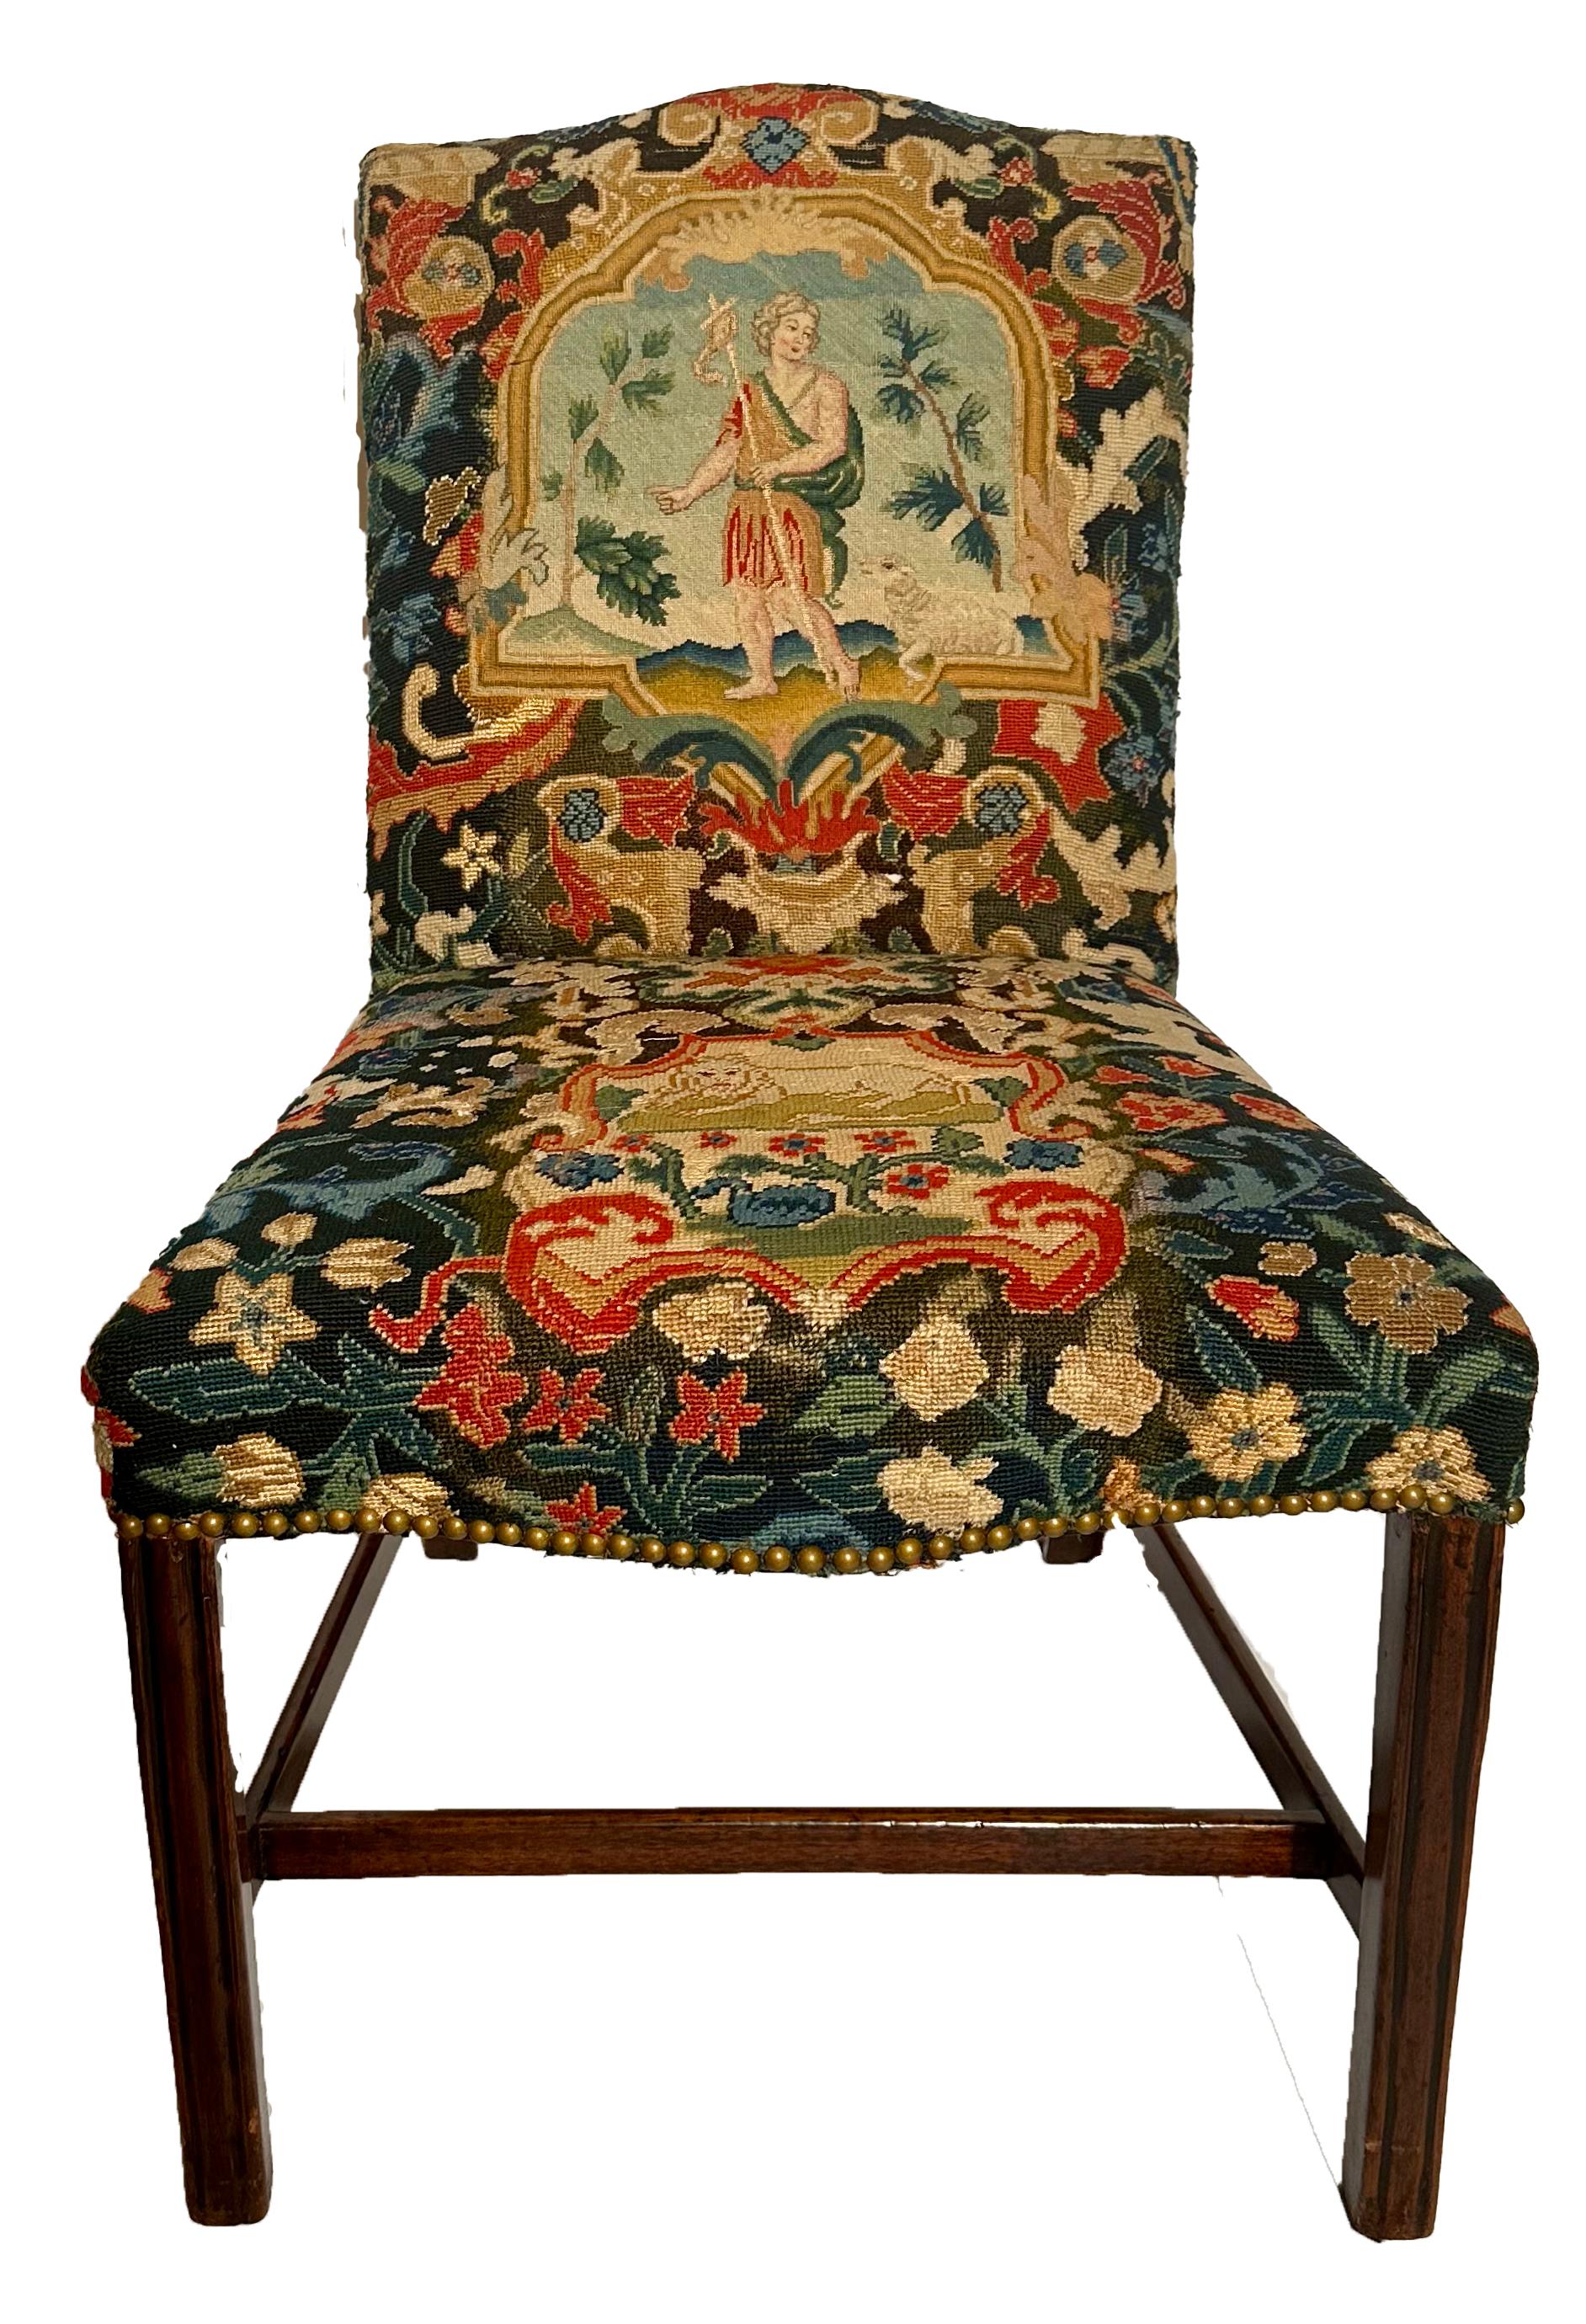 Set of 10 Antique English Georgian Mahogany and Needlepoint Chairs, Circa 1820's For Sale 1